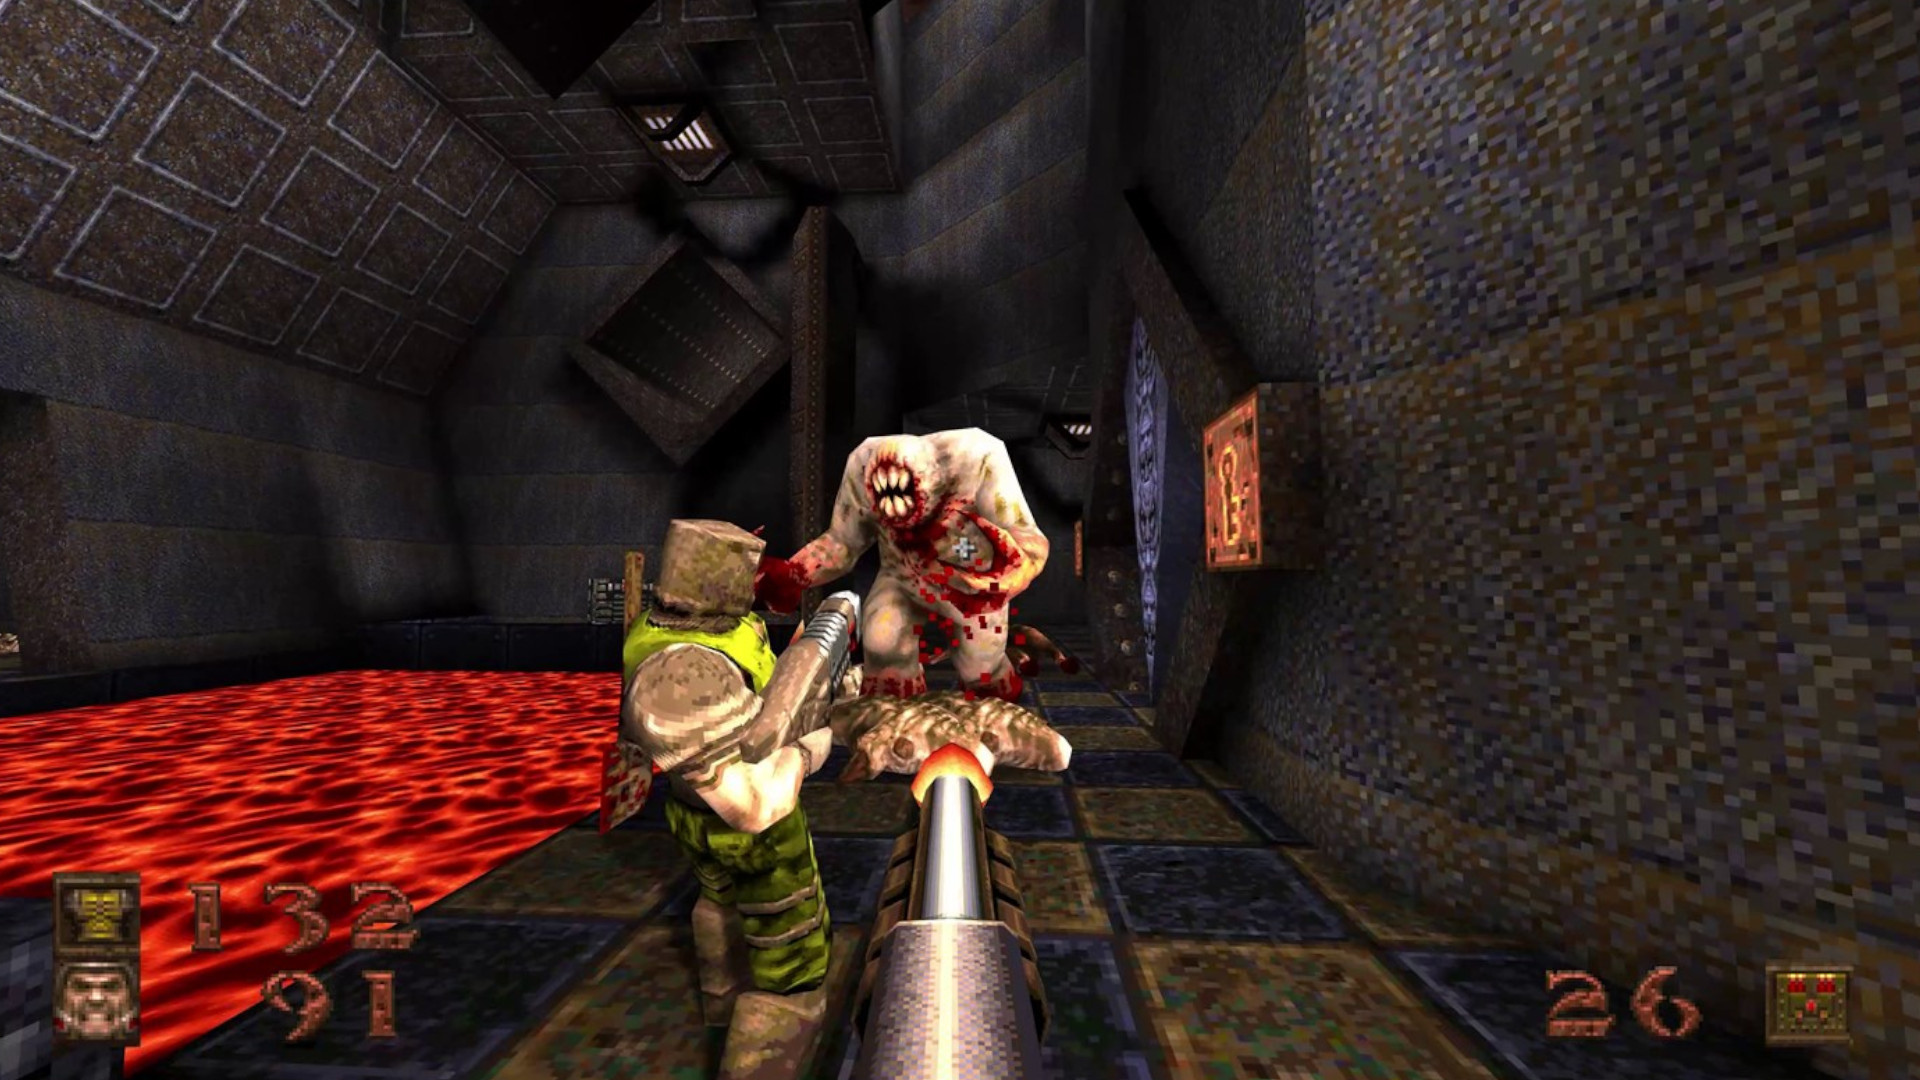 Quake remastered is real, out now, and brings Quake 64 to PC